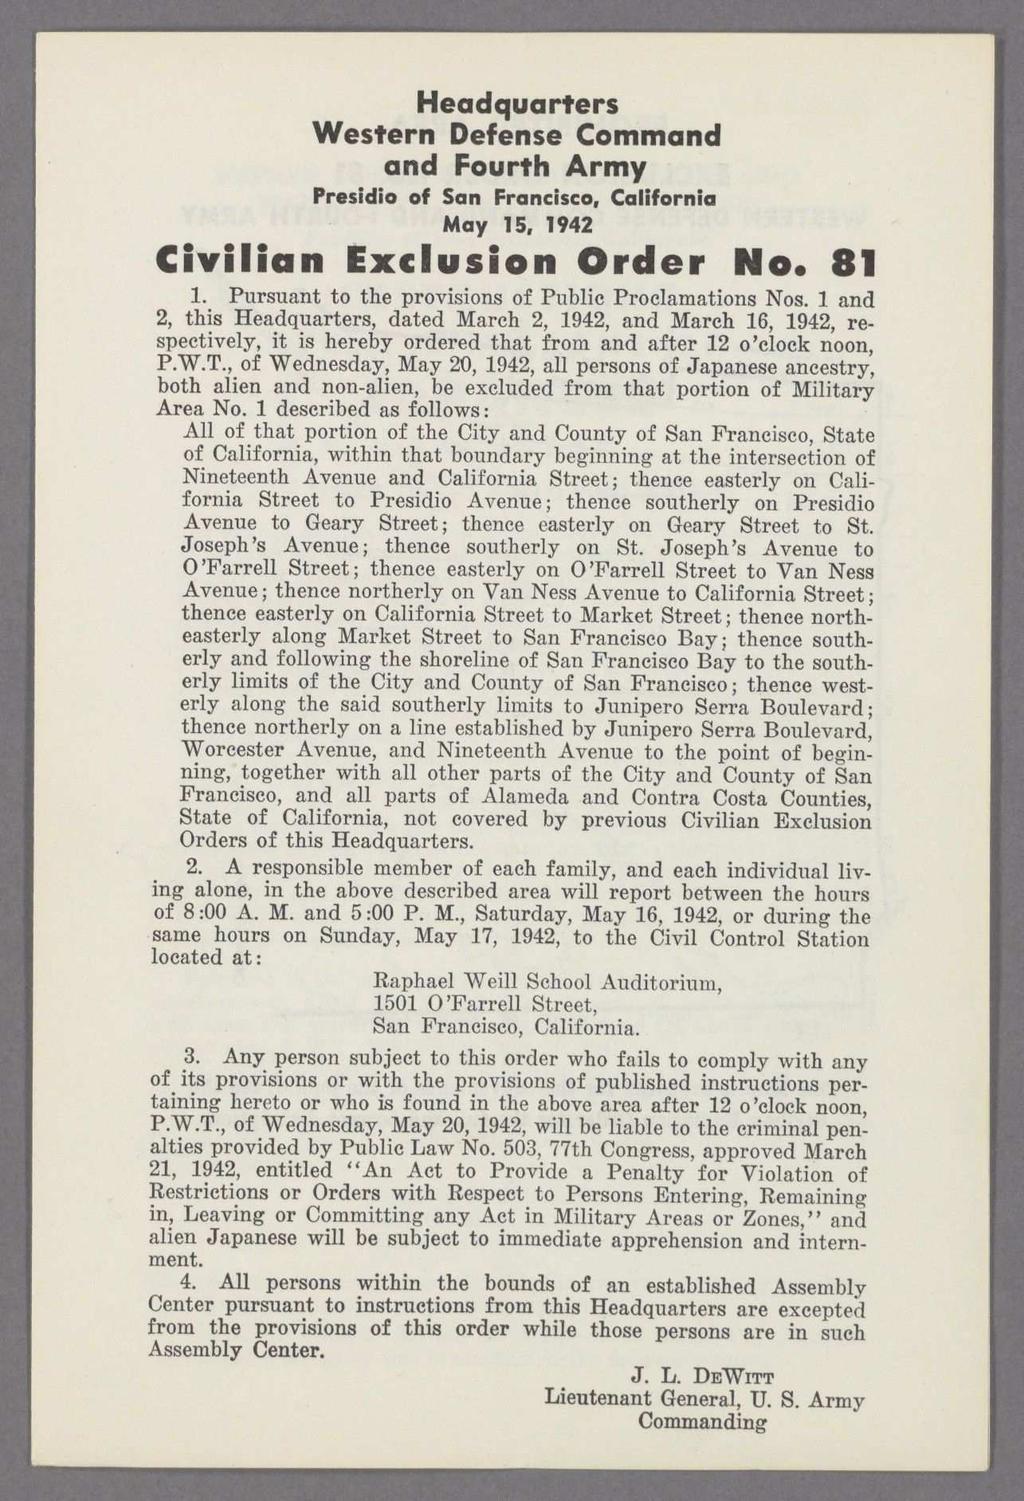 Headquarters Western Defense Command and Fourth Army May 15, 1942 Civilian Exclusion Order No* 81 1. Pursuant to the provisions of Public Proclamations Nos.